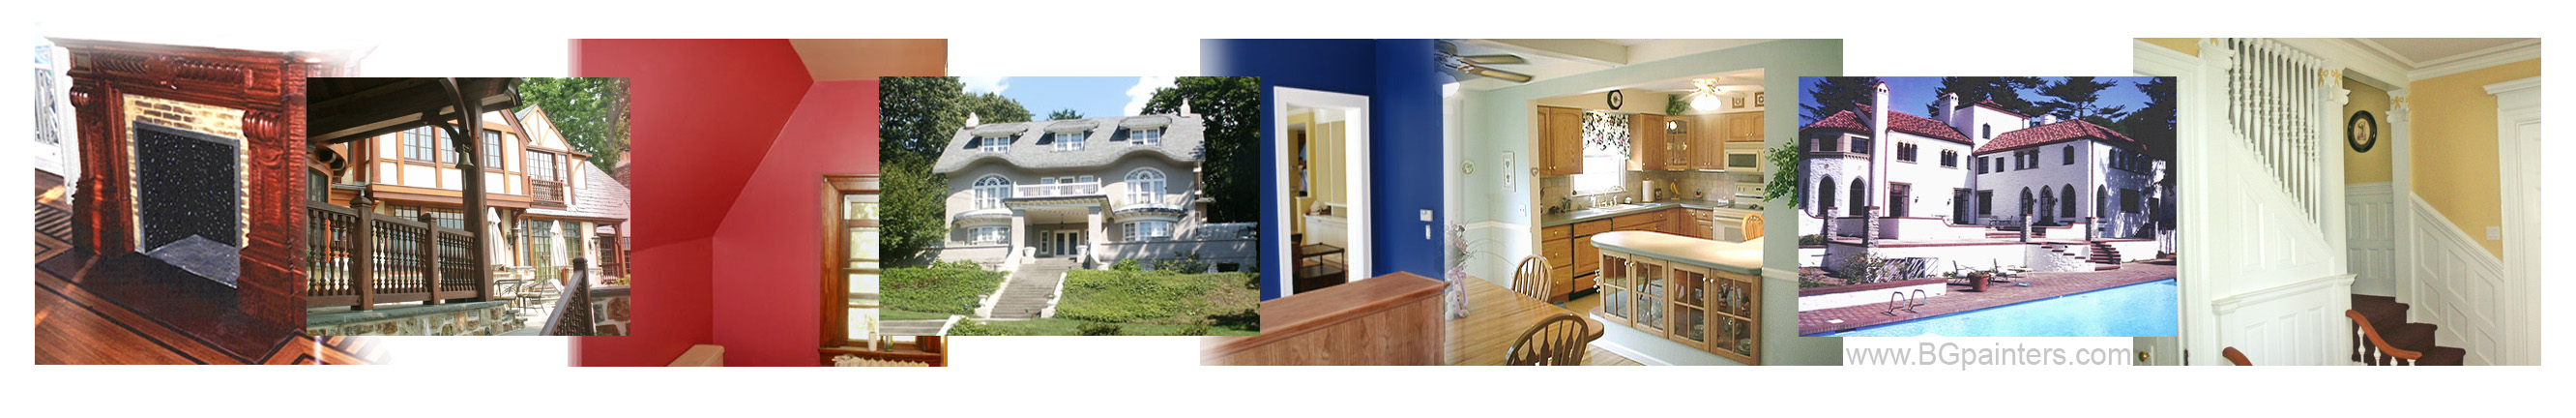 Painting contractors in westchester, Dobbs Ferry, NY